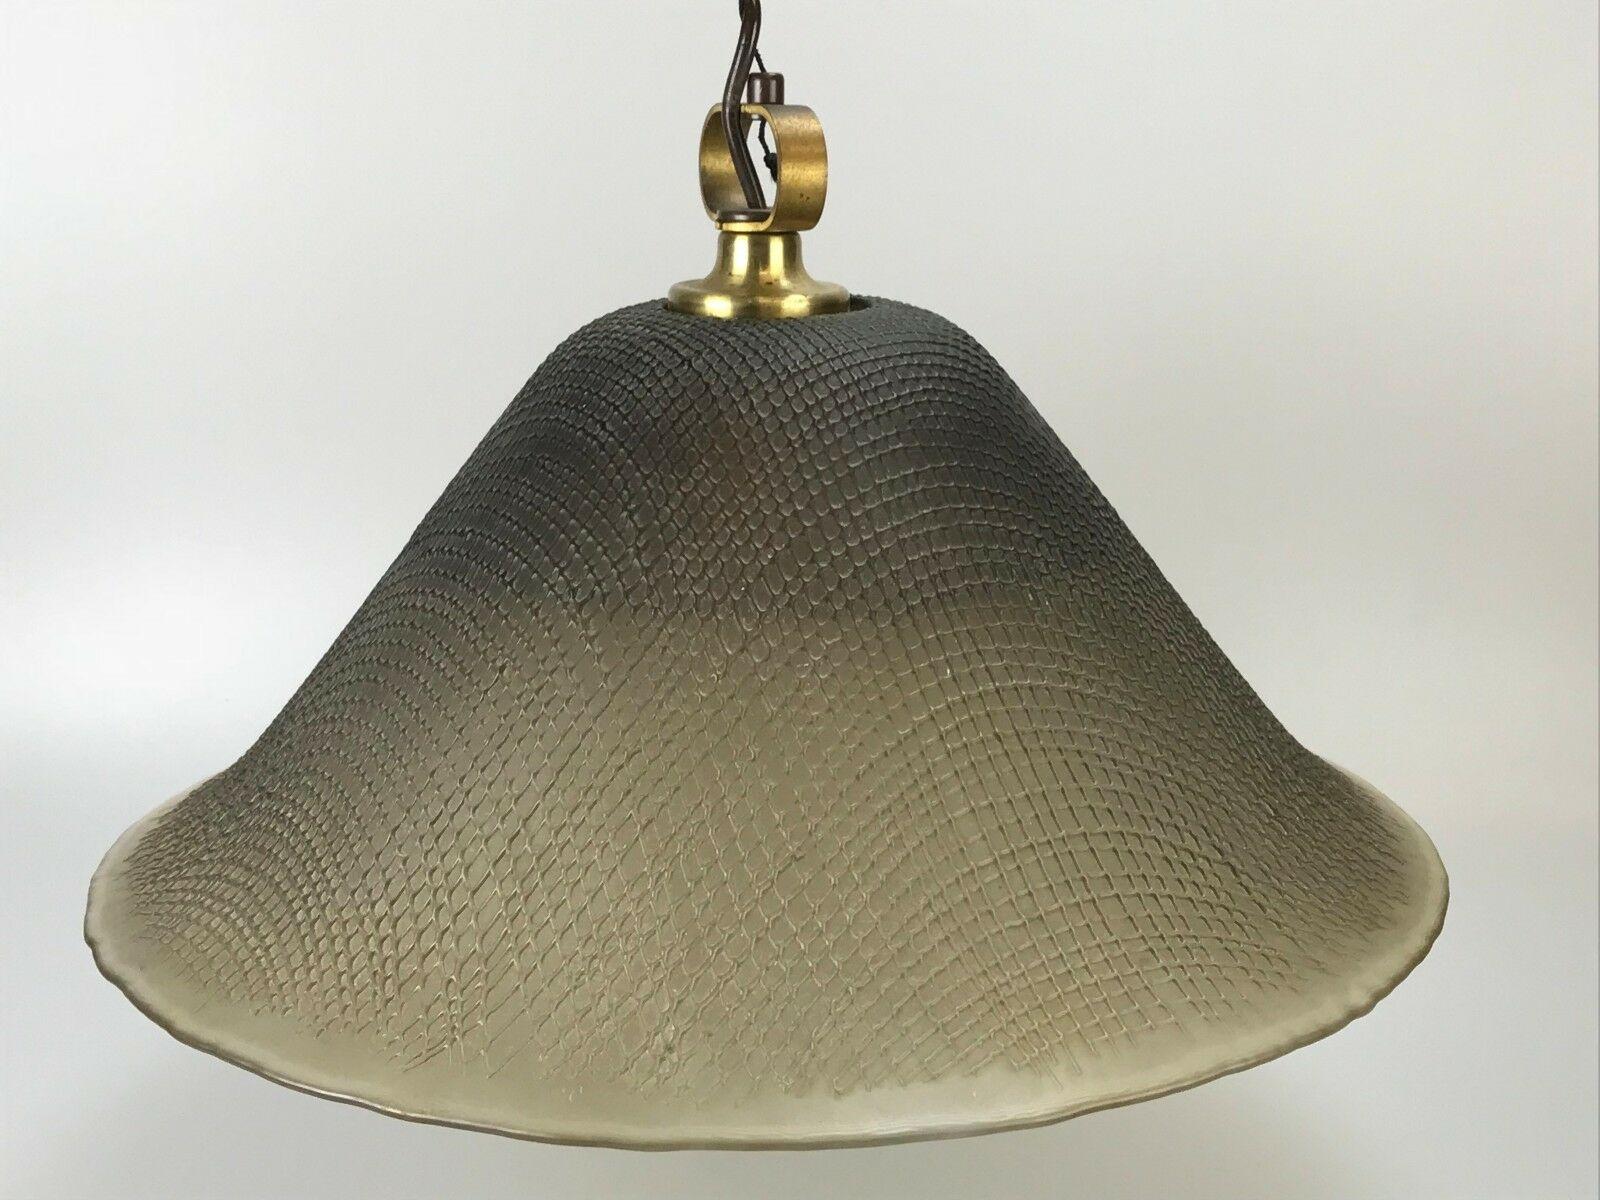 70s Peill & Putzler hanging lamp ceiling lamp glass space design lamp.

Object: hanging lamp

Manufacturer:

Condition: good

Age: around 1960-1970

Dimensions:

Diameter = 45cm
Hanging height = 70cm

Other notes:

The pictures